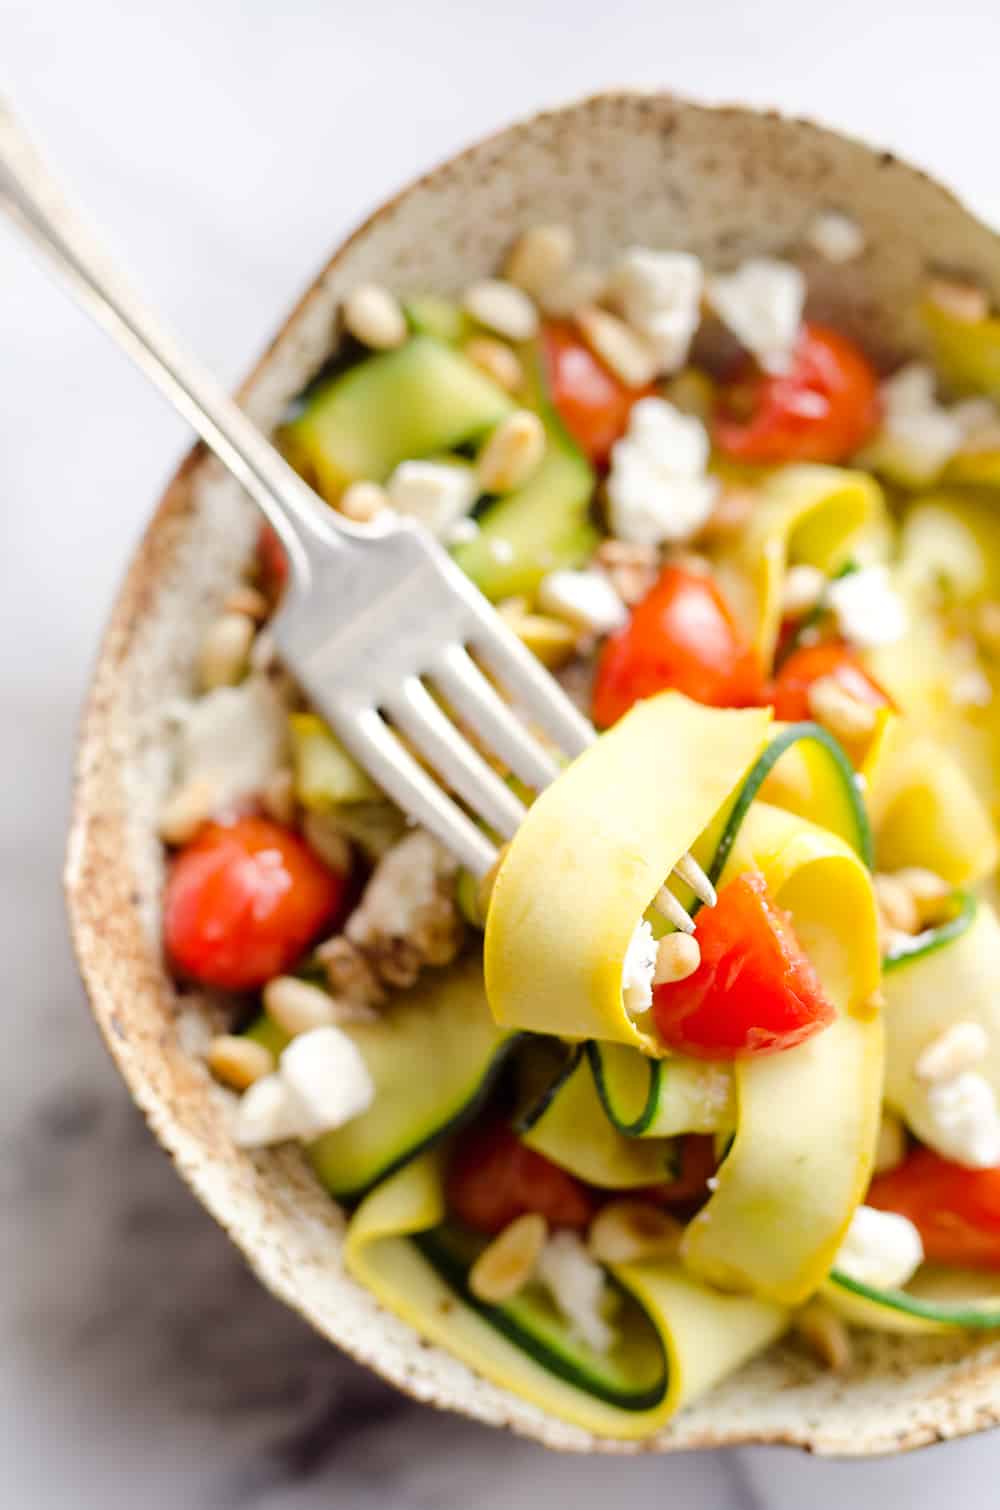 Ribboned Squash & Zucchini Salad is a fresh and healthy vegetarian salad with light veggies, toasted pine nuts, creamy goat cheese and balsamic glaze. Pair it with some grilled shrimp or chicken for an amazing and flavorful dinner you won't forget!